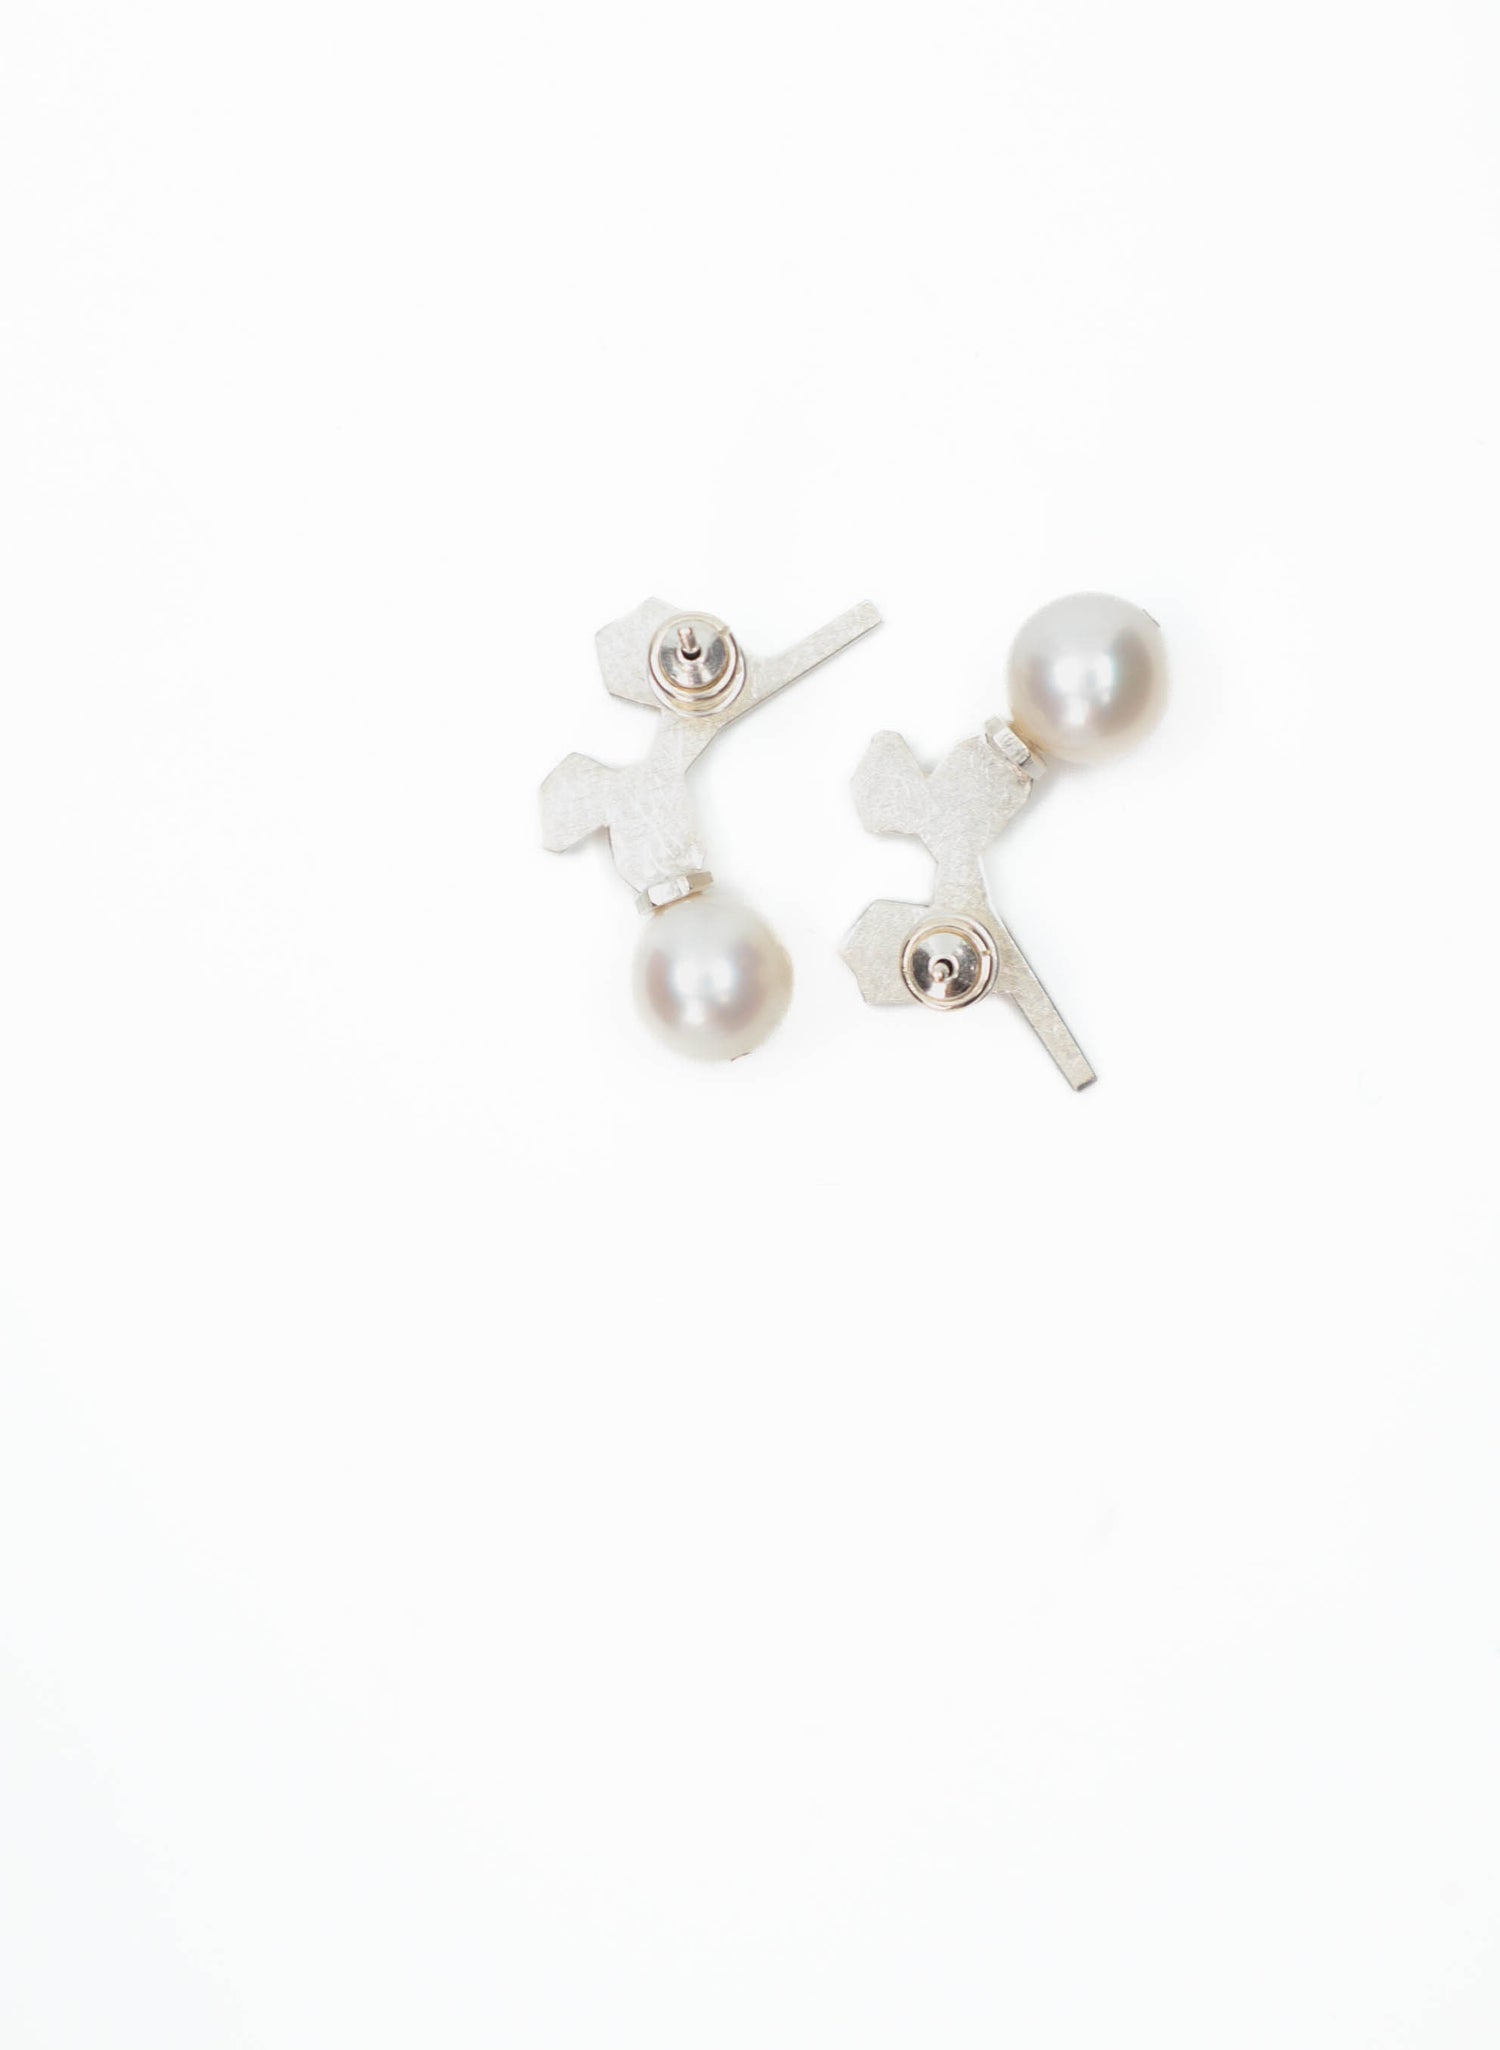 Leaf Structure Stud Earrings with Pearl